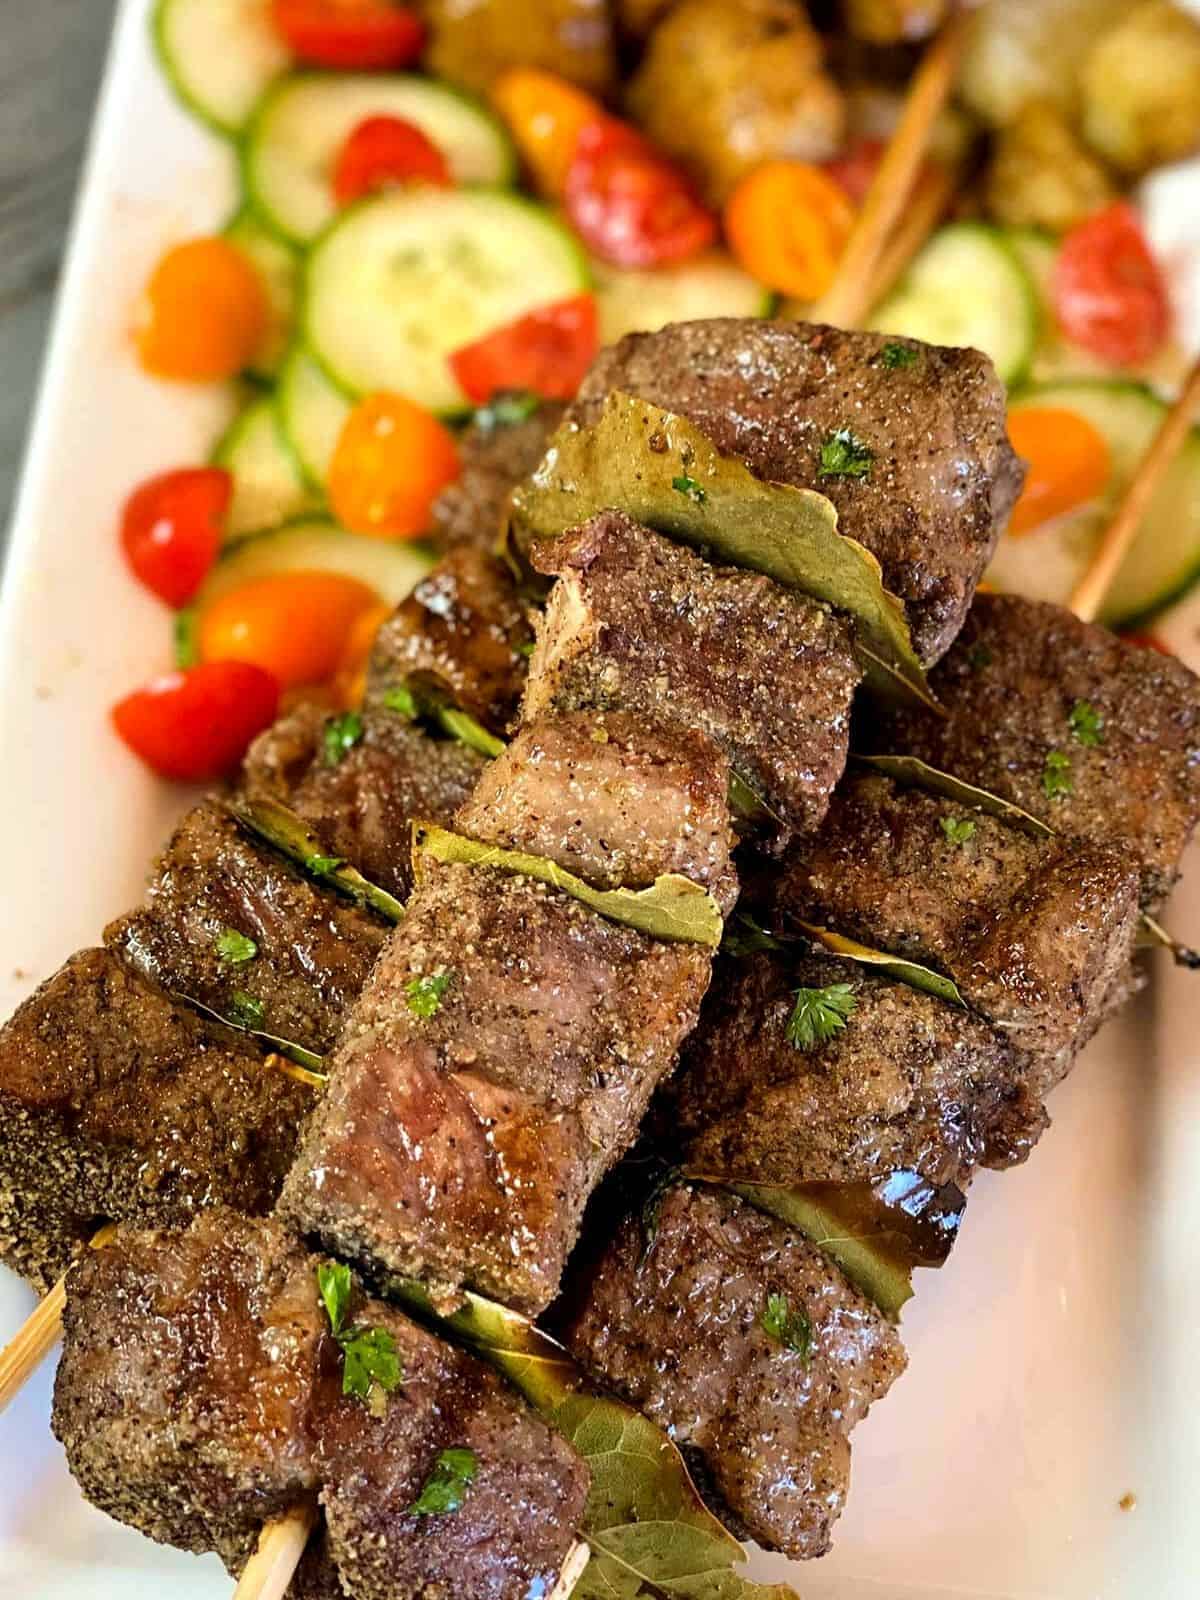 Beef kabobs with bay leaves in between, served with veggies.